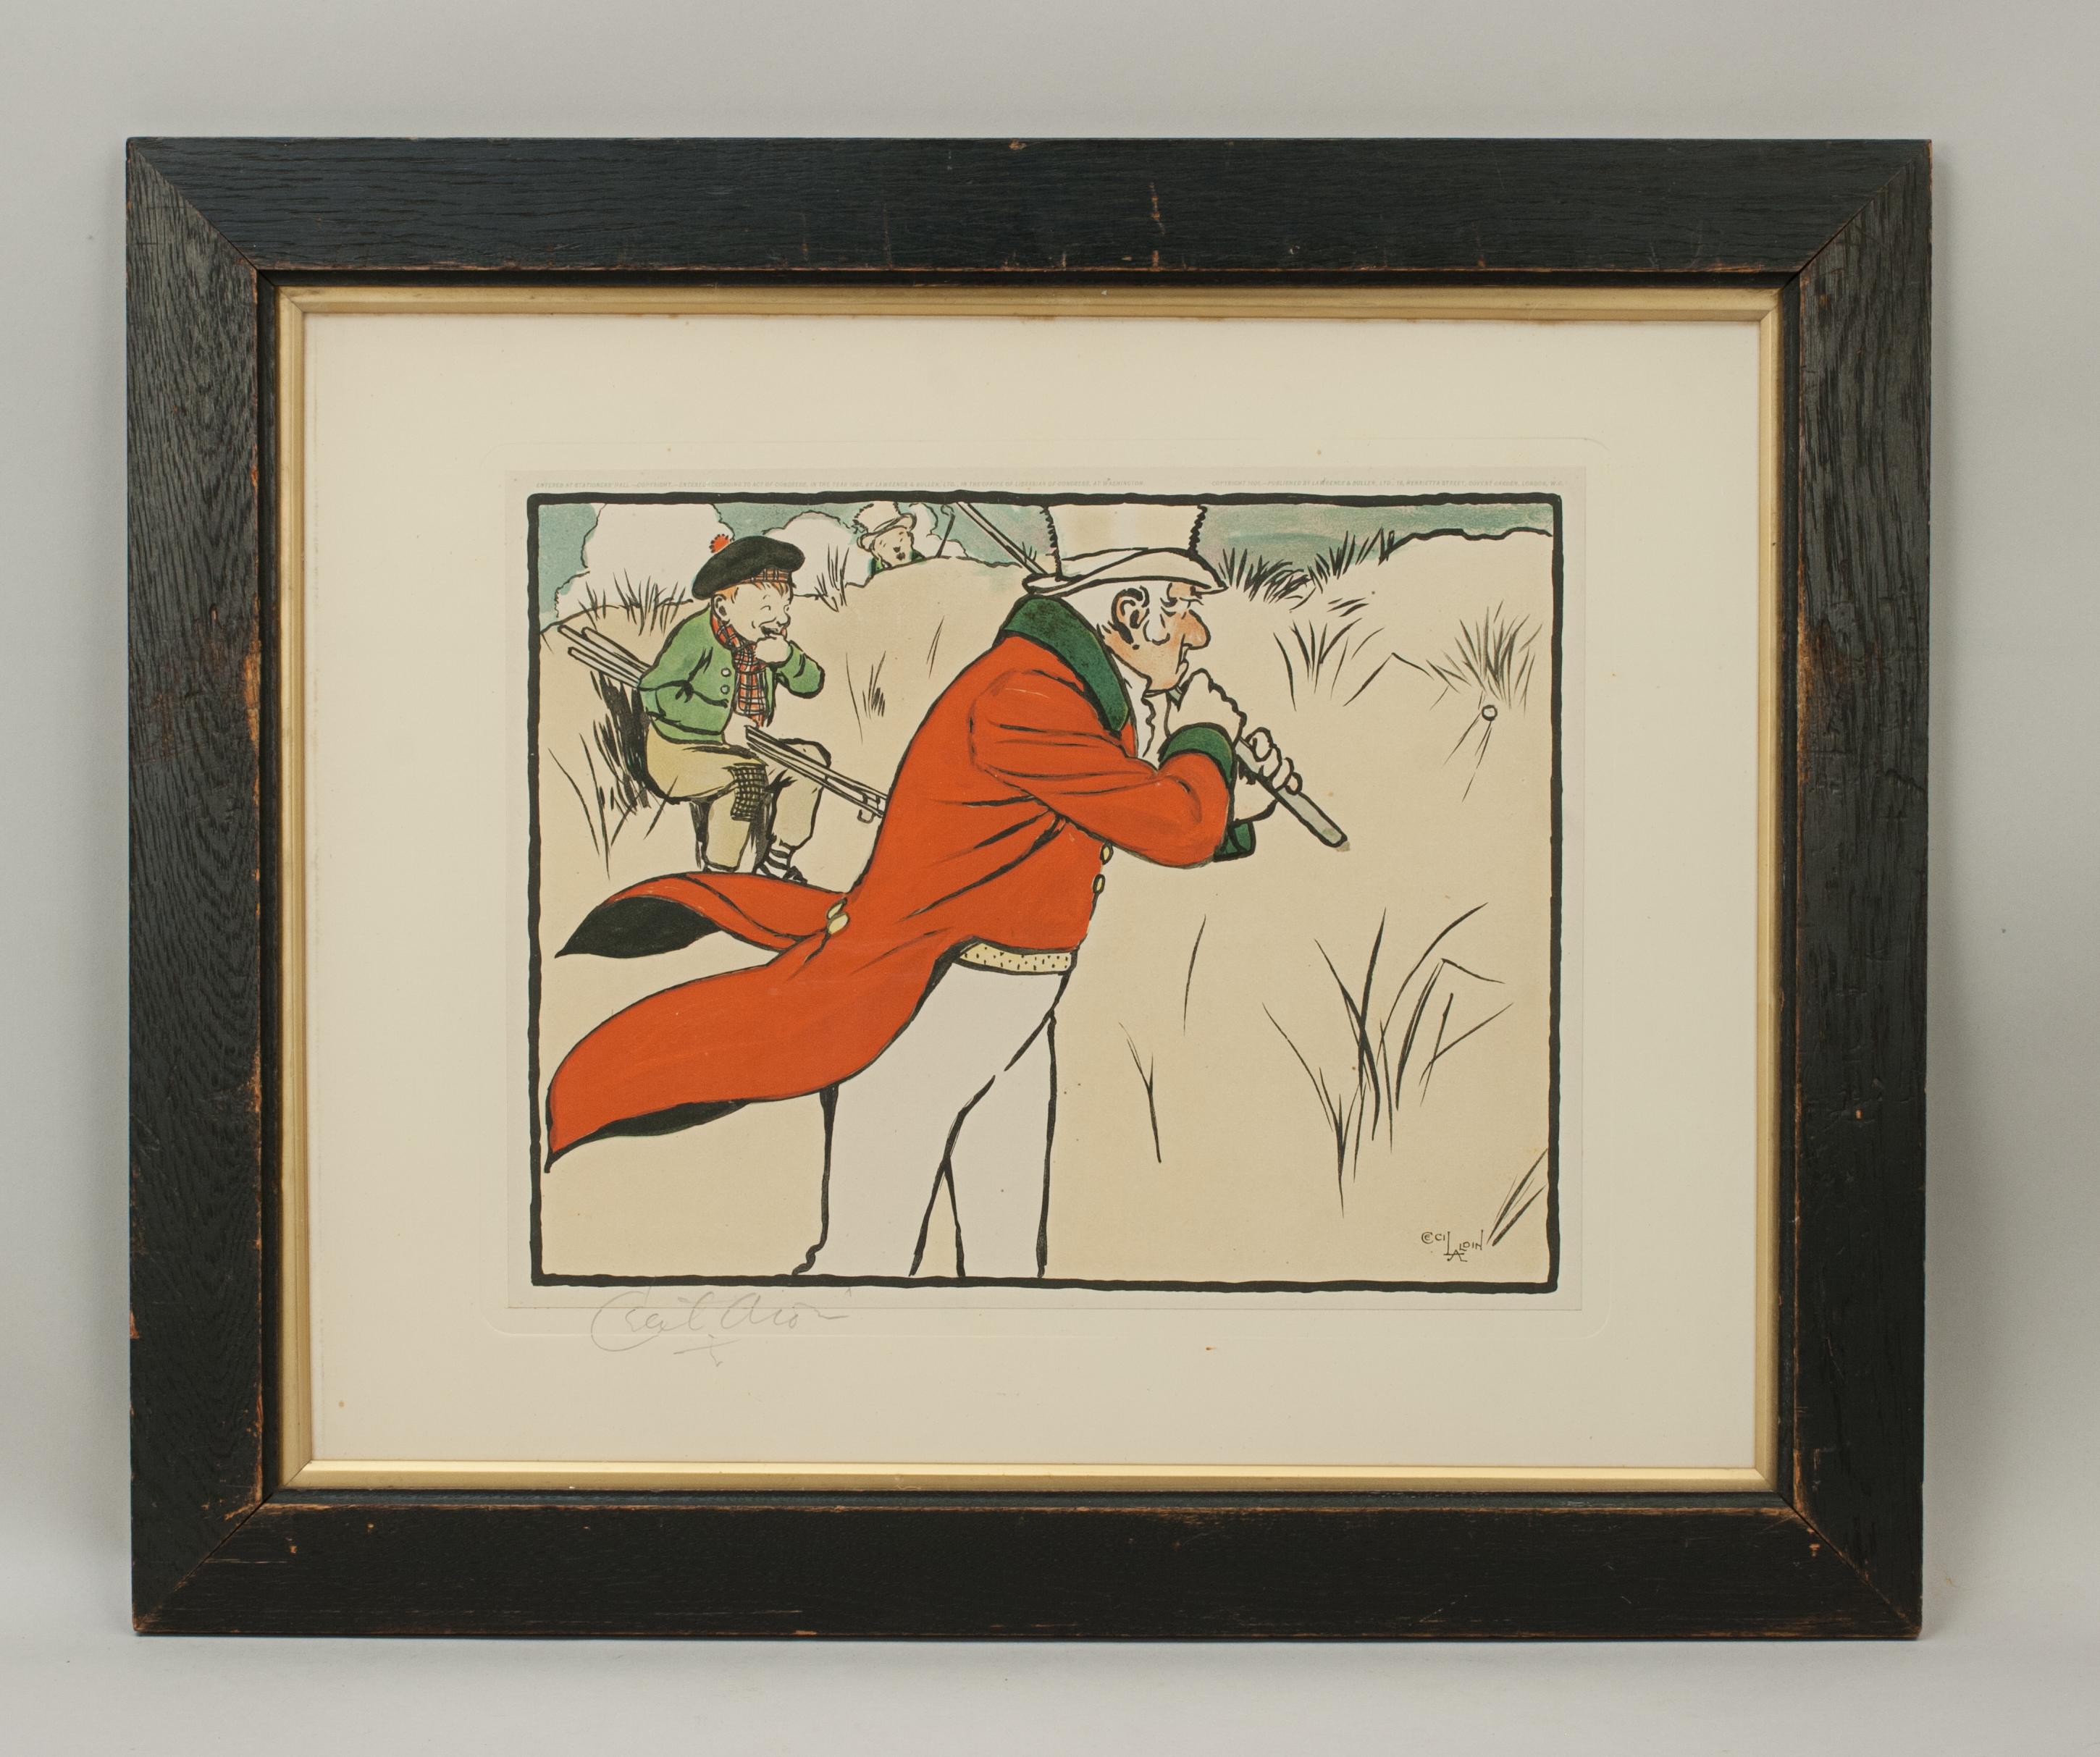 Sporting Art Vintage Golf Print, Cecil Aldin, Old English Sports and Pastimes